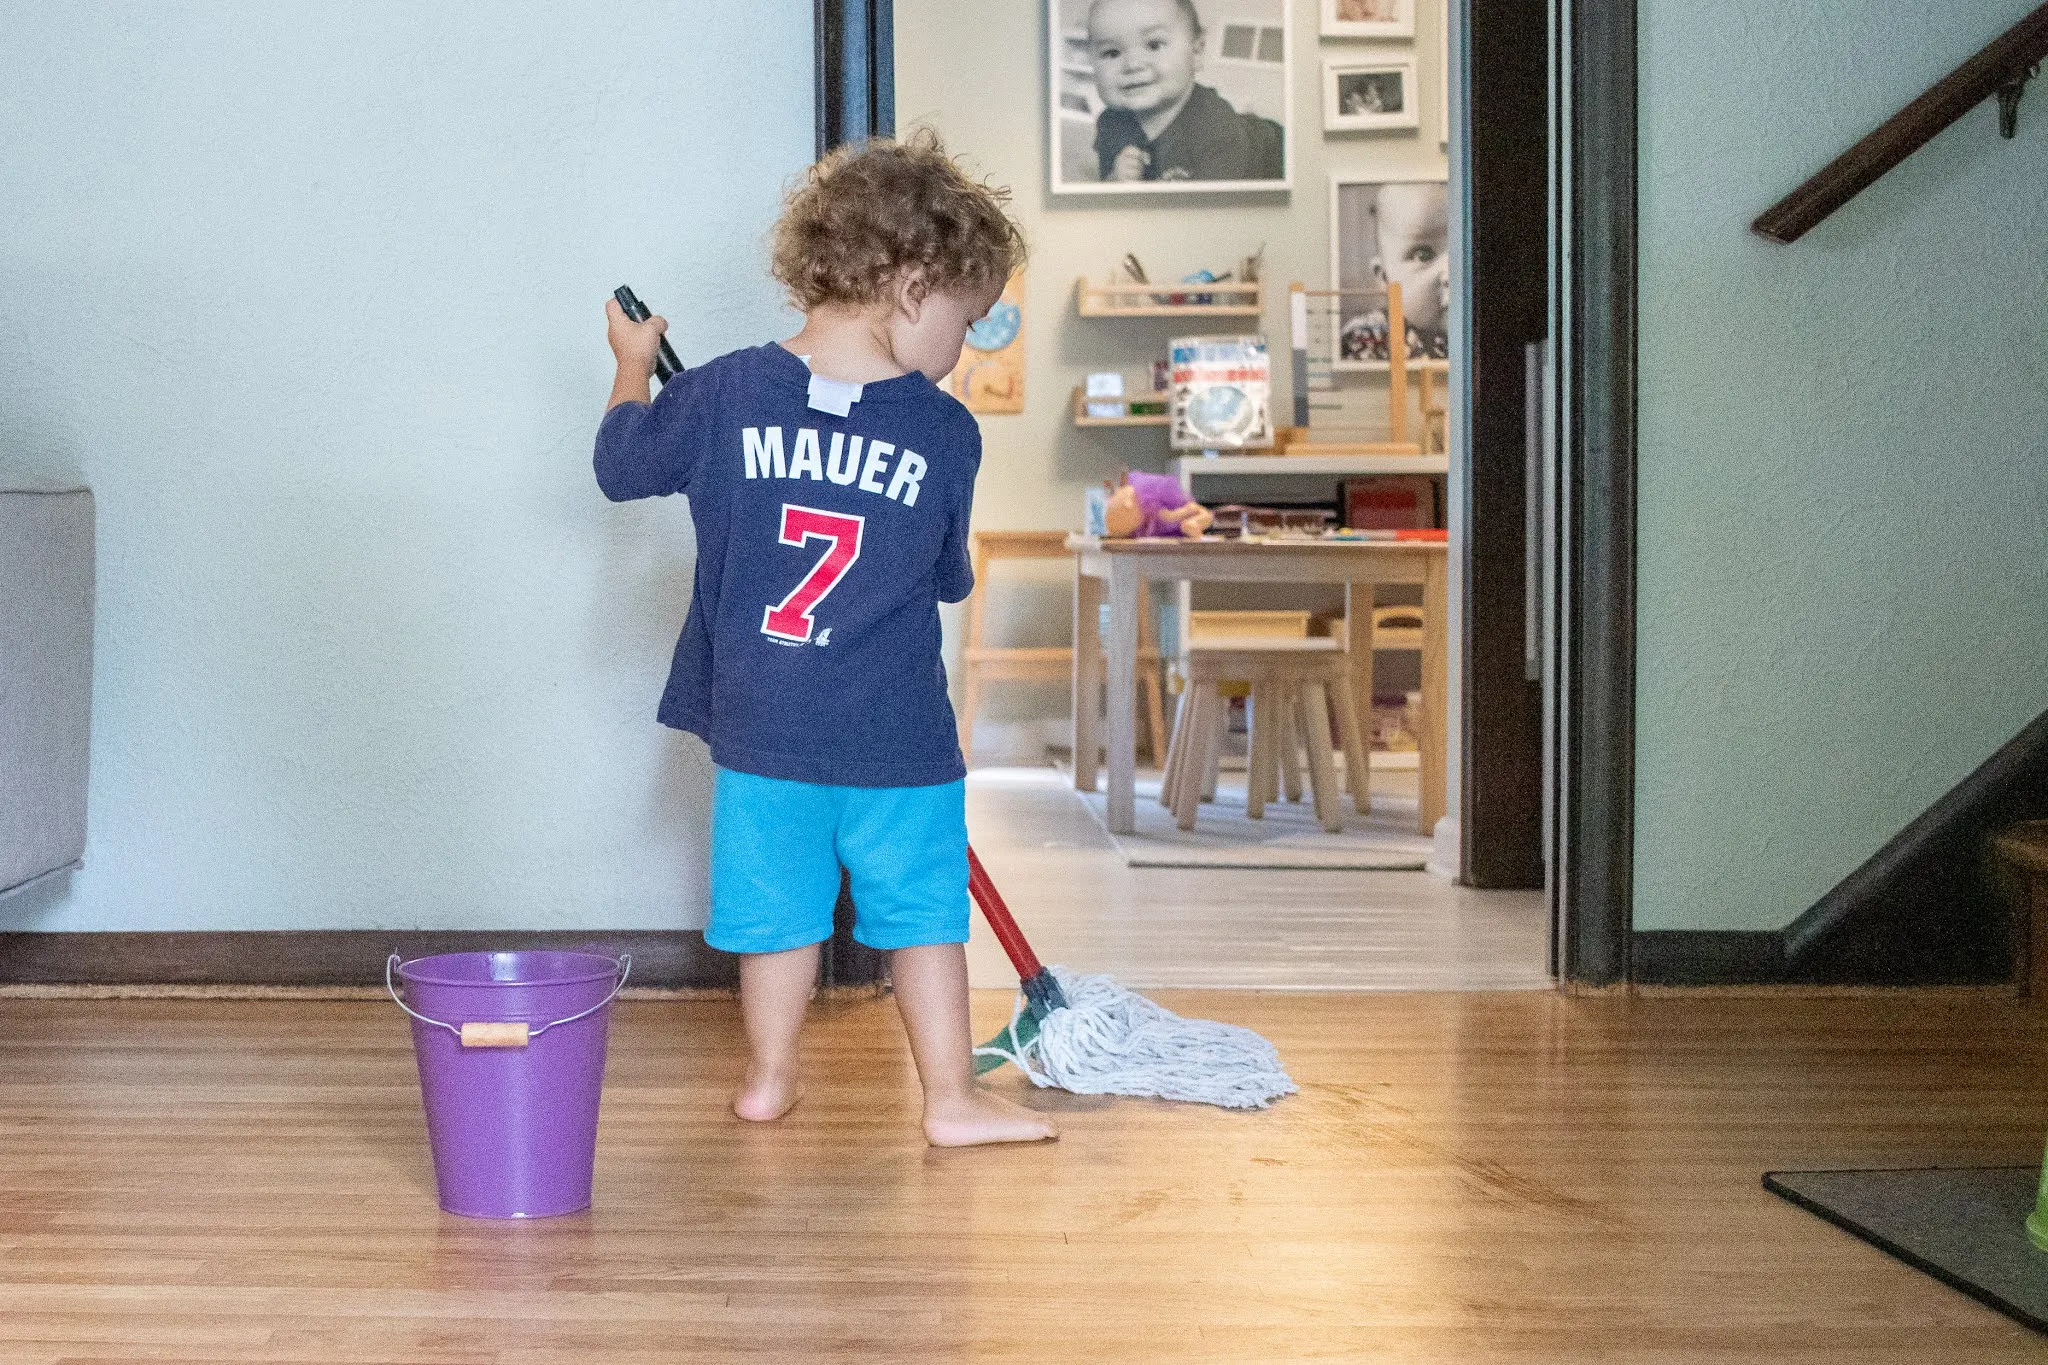 Montessori 2-year-old stands with back to camera near a small bucket of water. In his hands is a child sized mop which he is using to clean the floor.